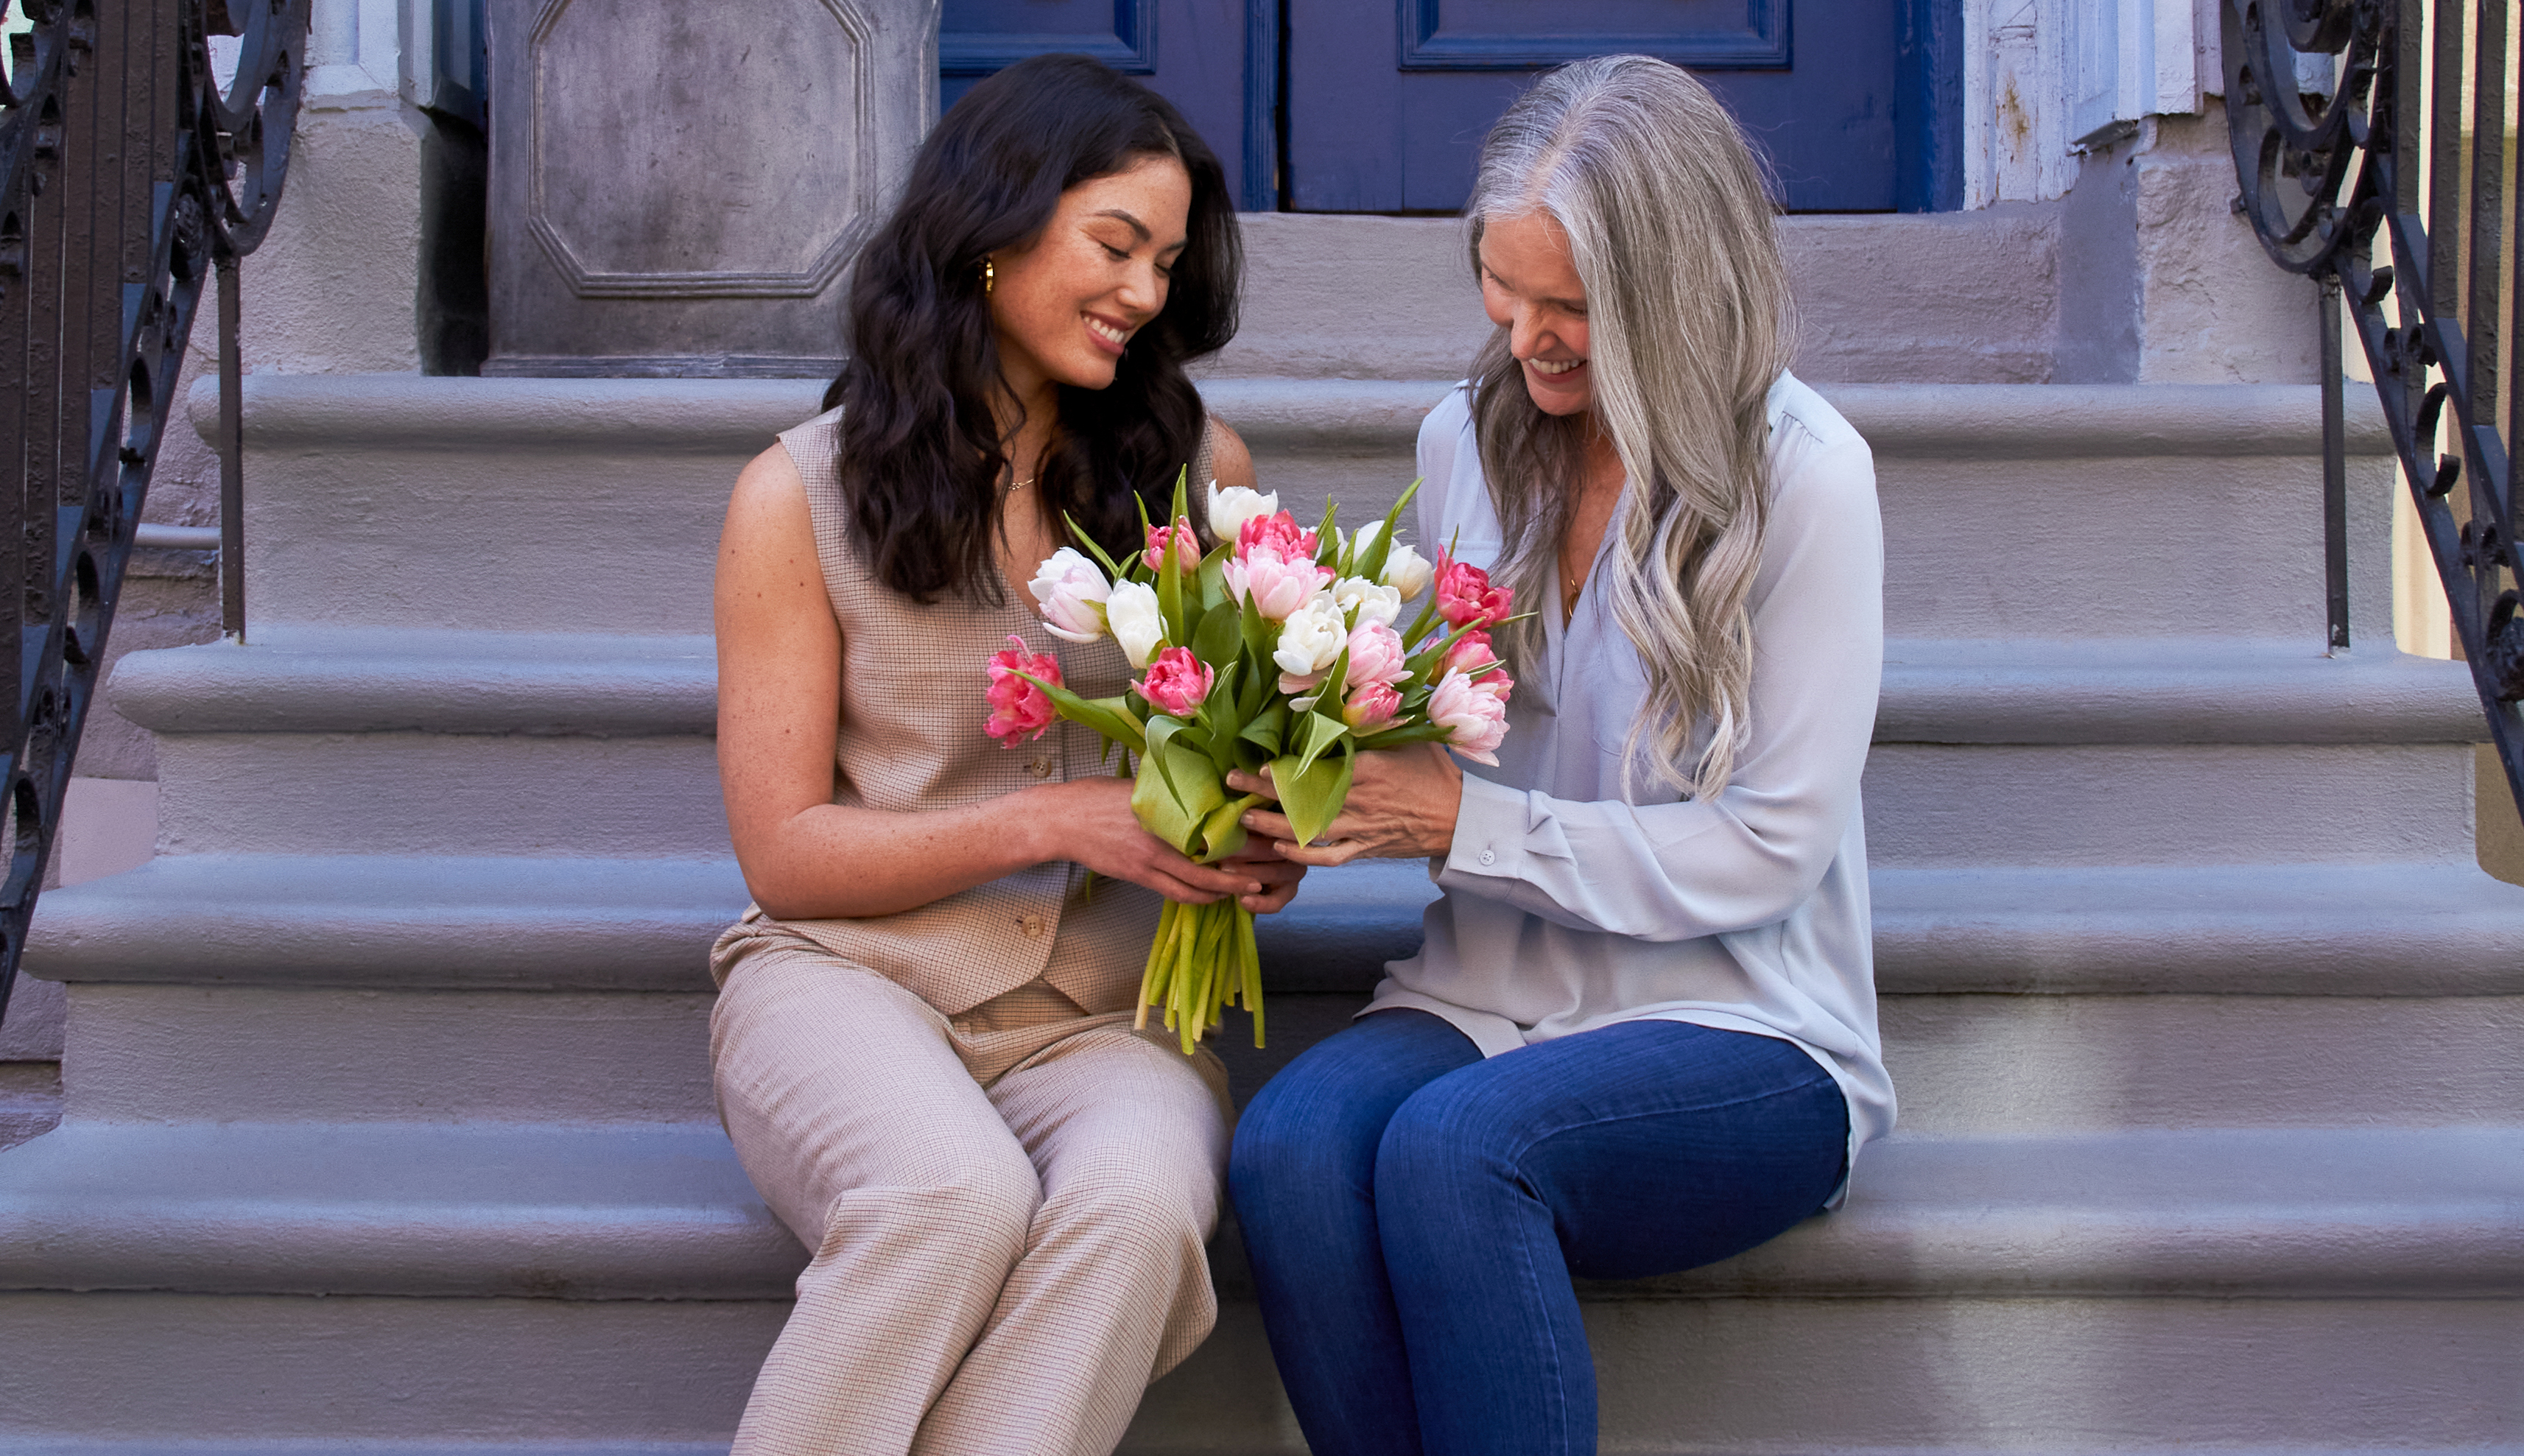 Daughter gifting Mother's Day flowers to her mom on the front steps of a building